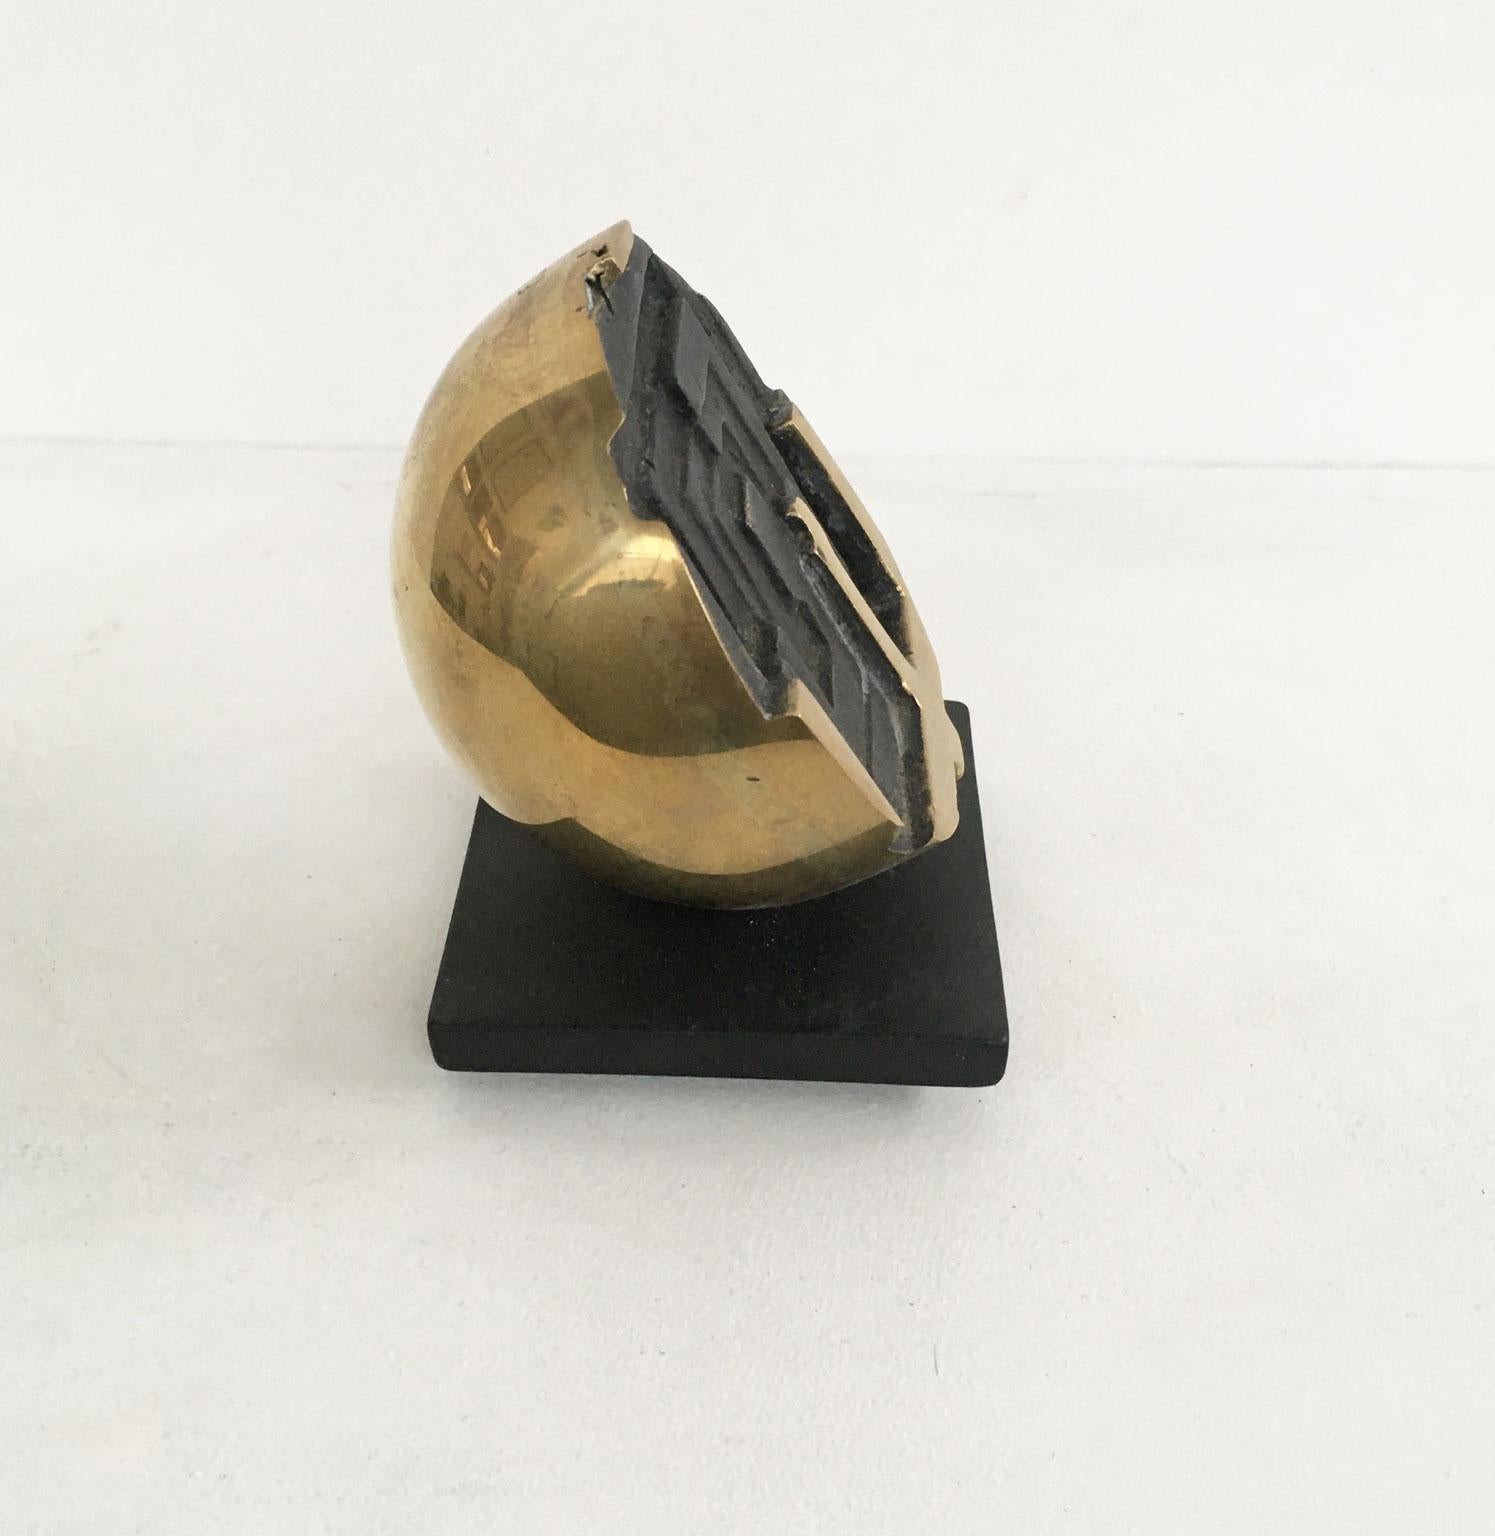 1978 Italy Bronze Abstract Sculpture by Fanna Roncoroni Labirinto Labyrinth For Sale 5